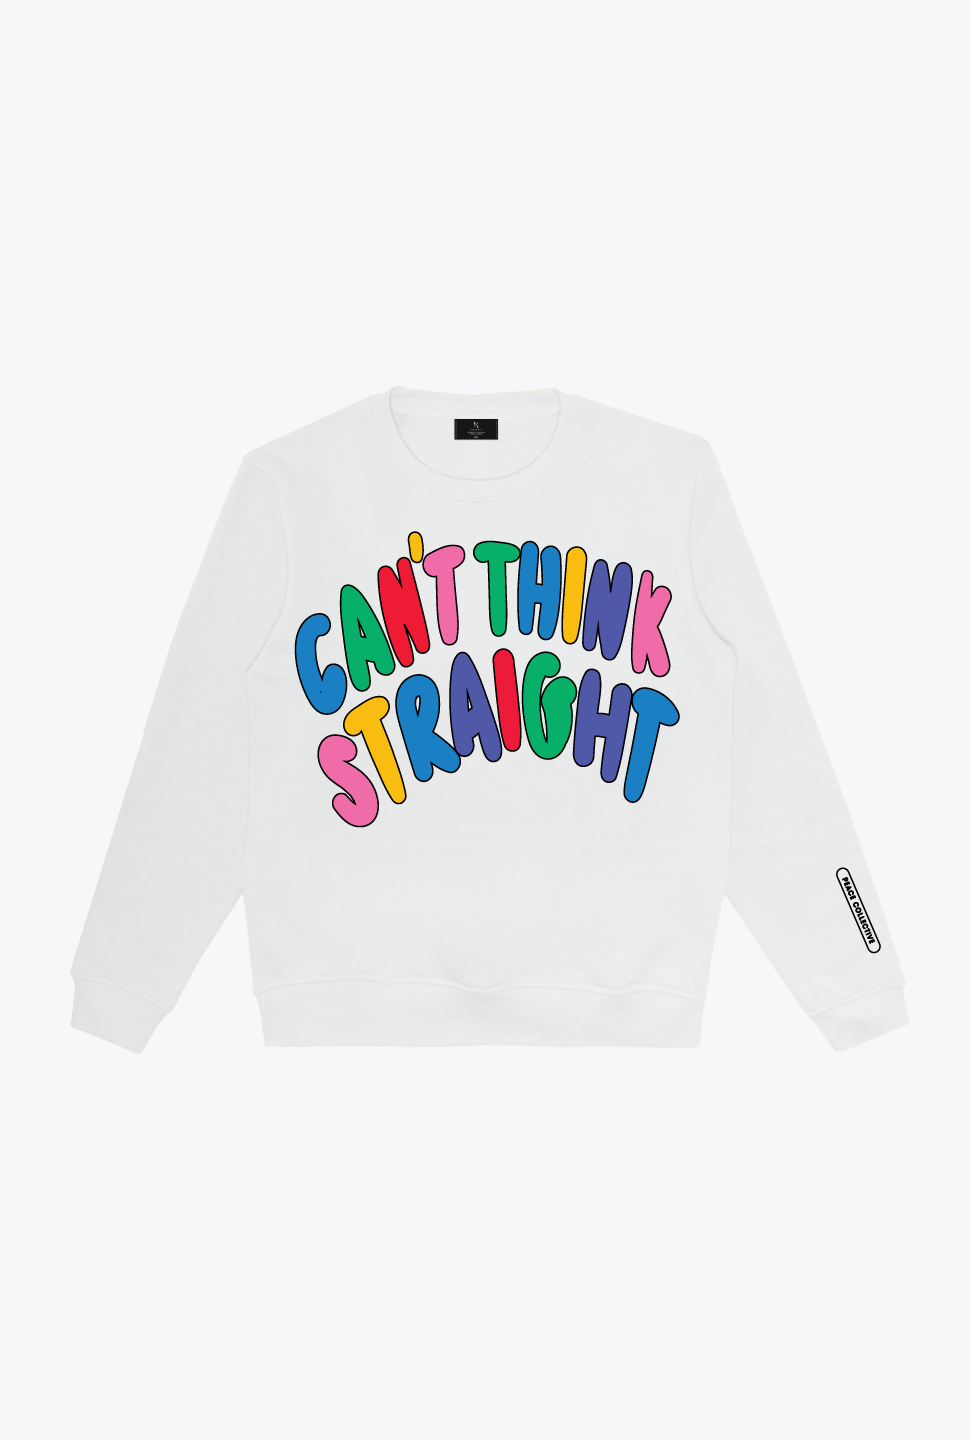 Can't Think Straight Crewneck - White